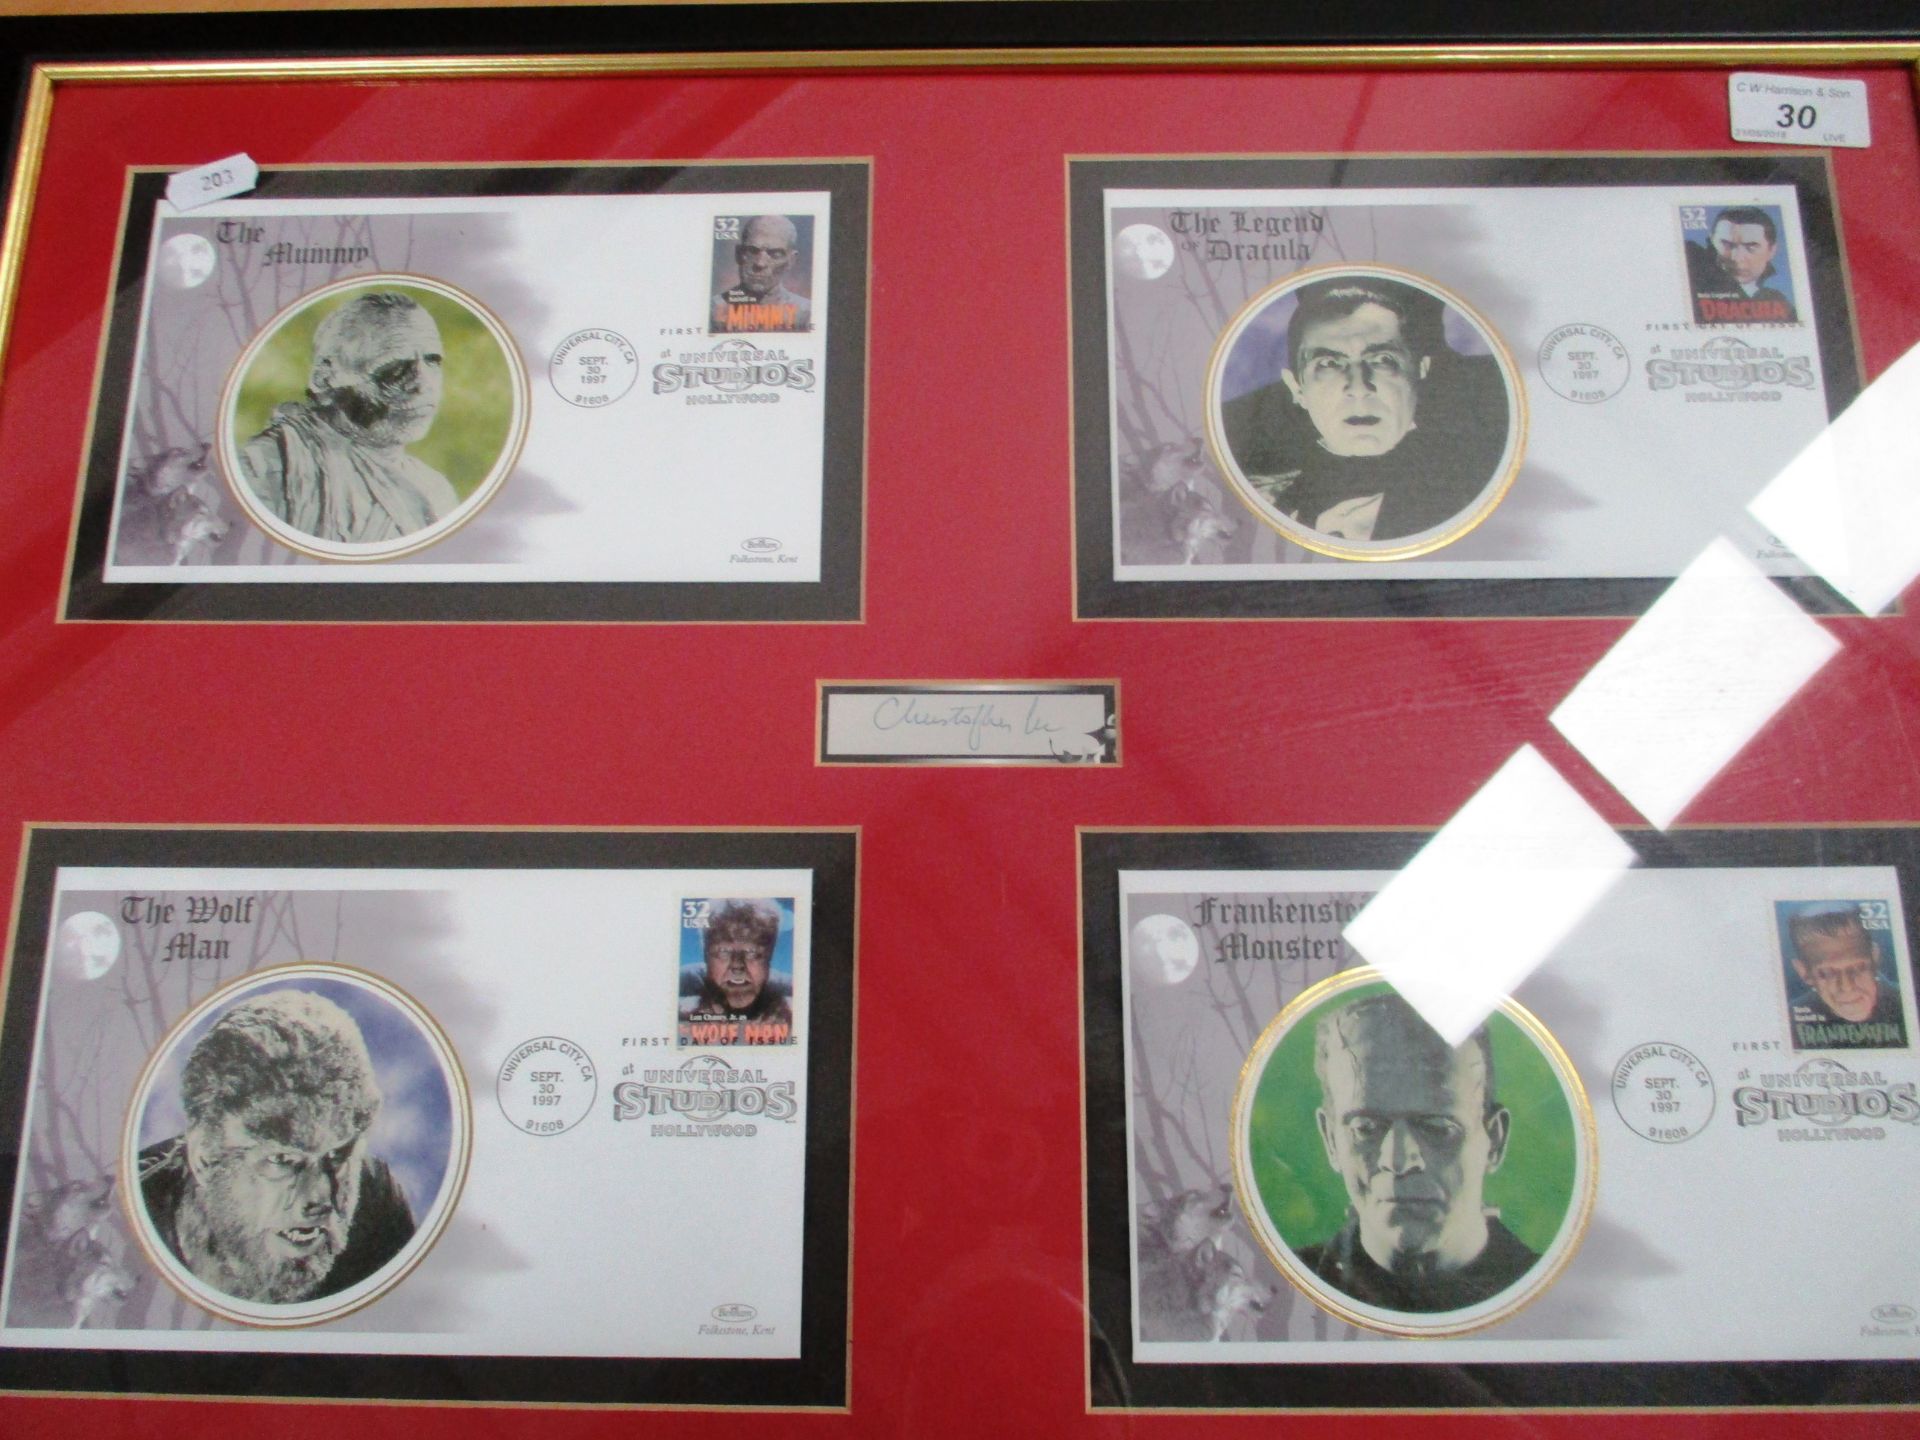 A framed Ltd Edition Classic Horror 1st Day issue montage stamped Universal Studios 30.09.